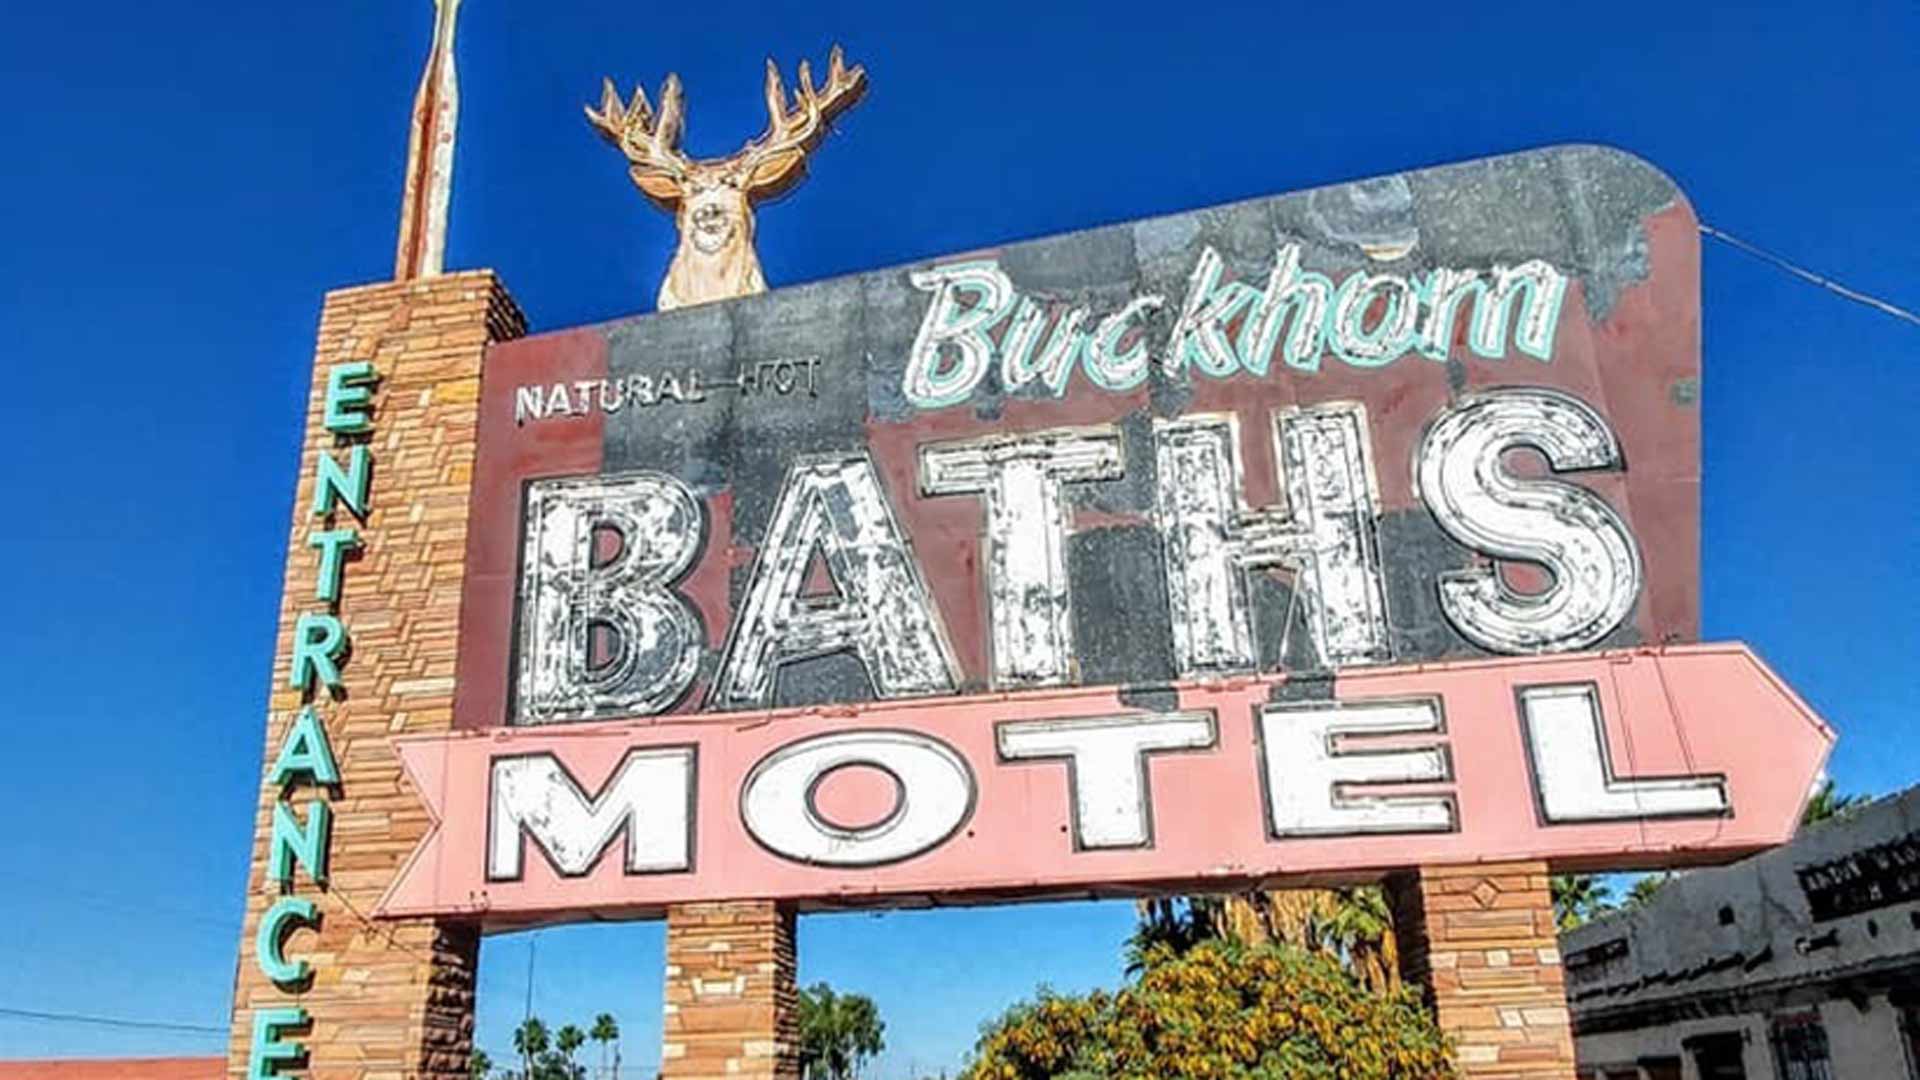 Buckhorn Baths Motel, on the corner of Main Street and Recker Road in Mesa, played a role in bringing spring training to Arizona. But the hotel and spa has fallen into disrepair. 